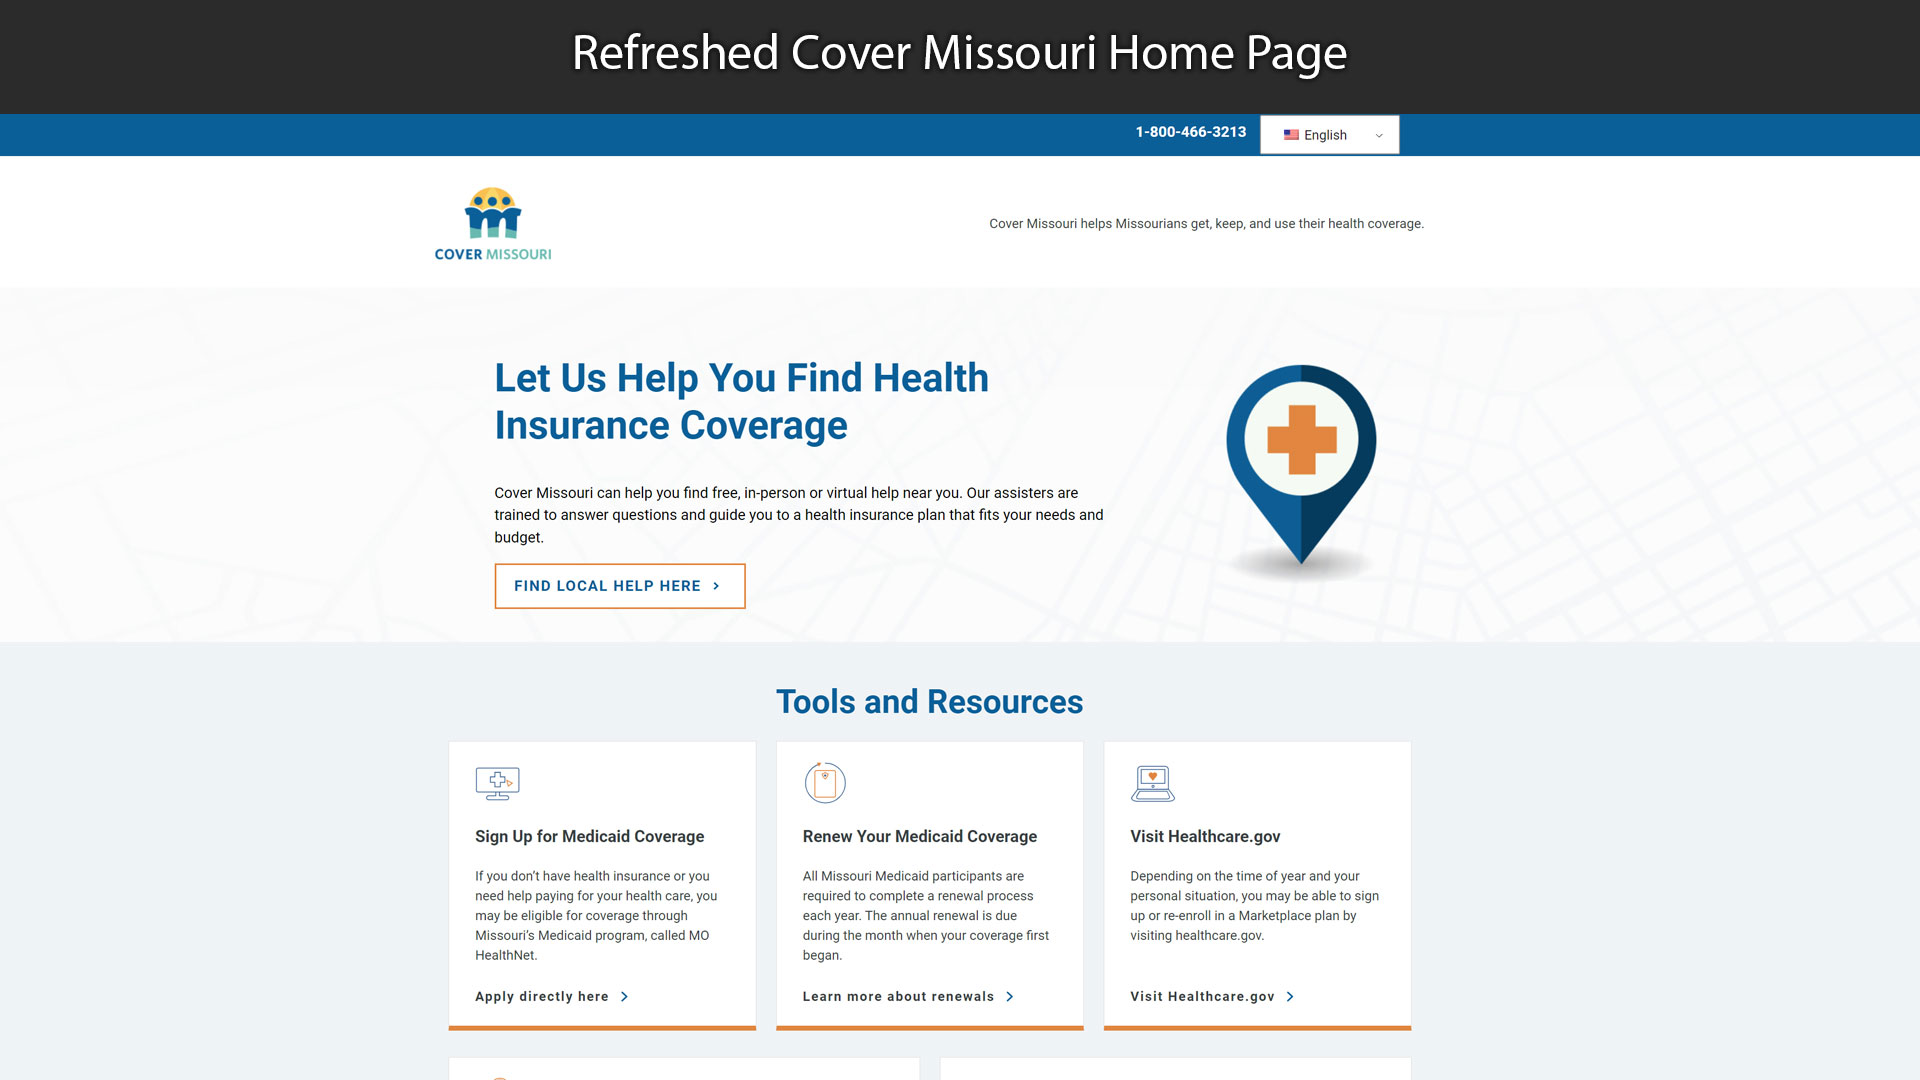 Refreshed Cover Missouri Home page